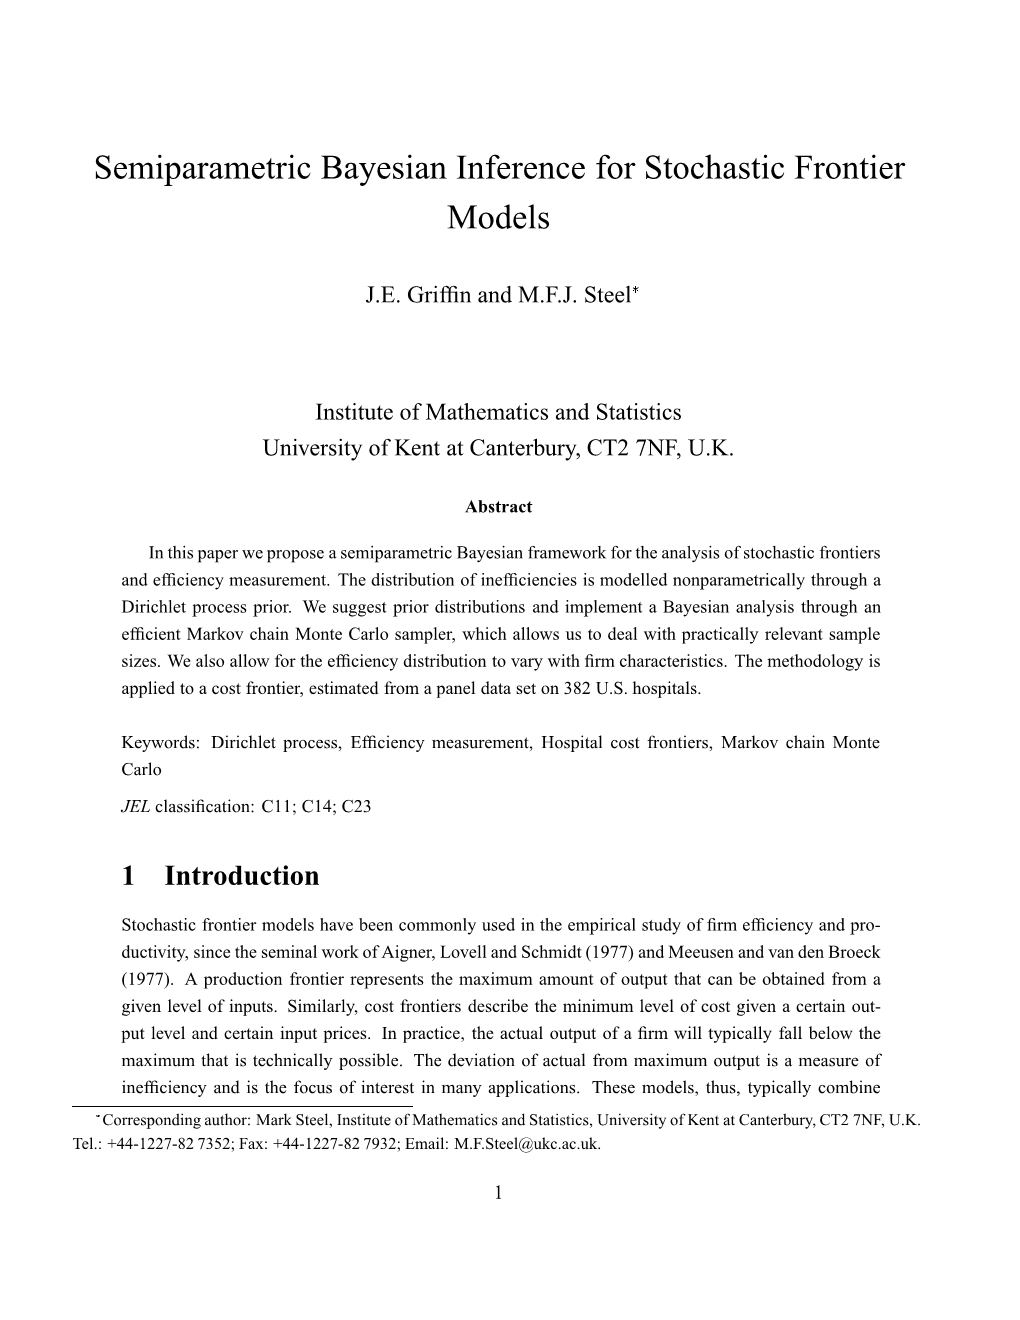 Semiparametric Bayesian Inference for Stochastic Frontier Models